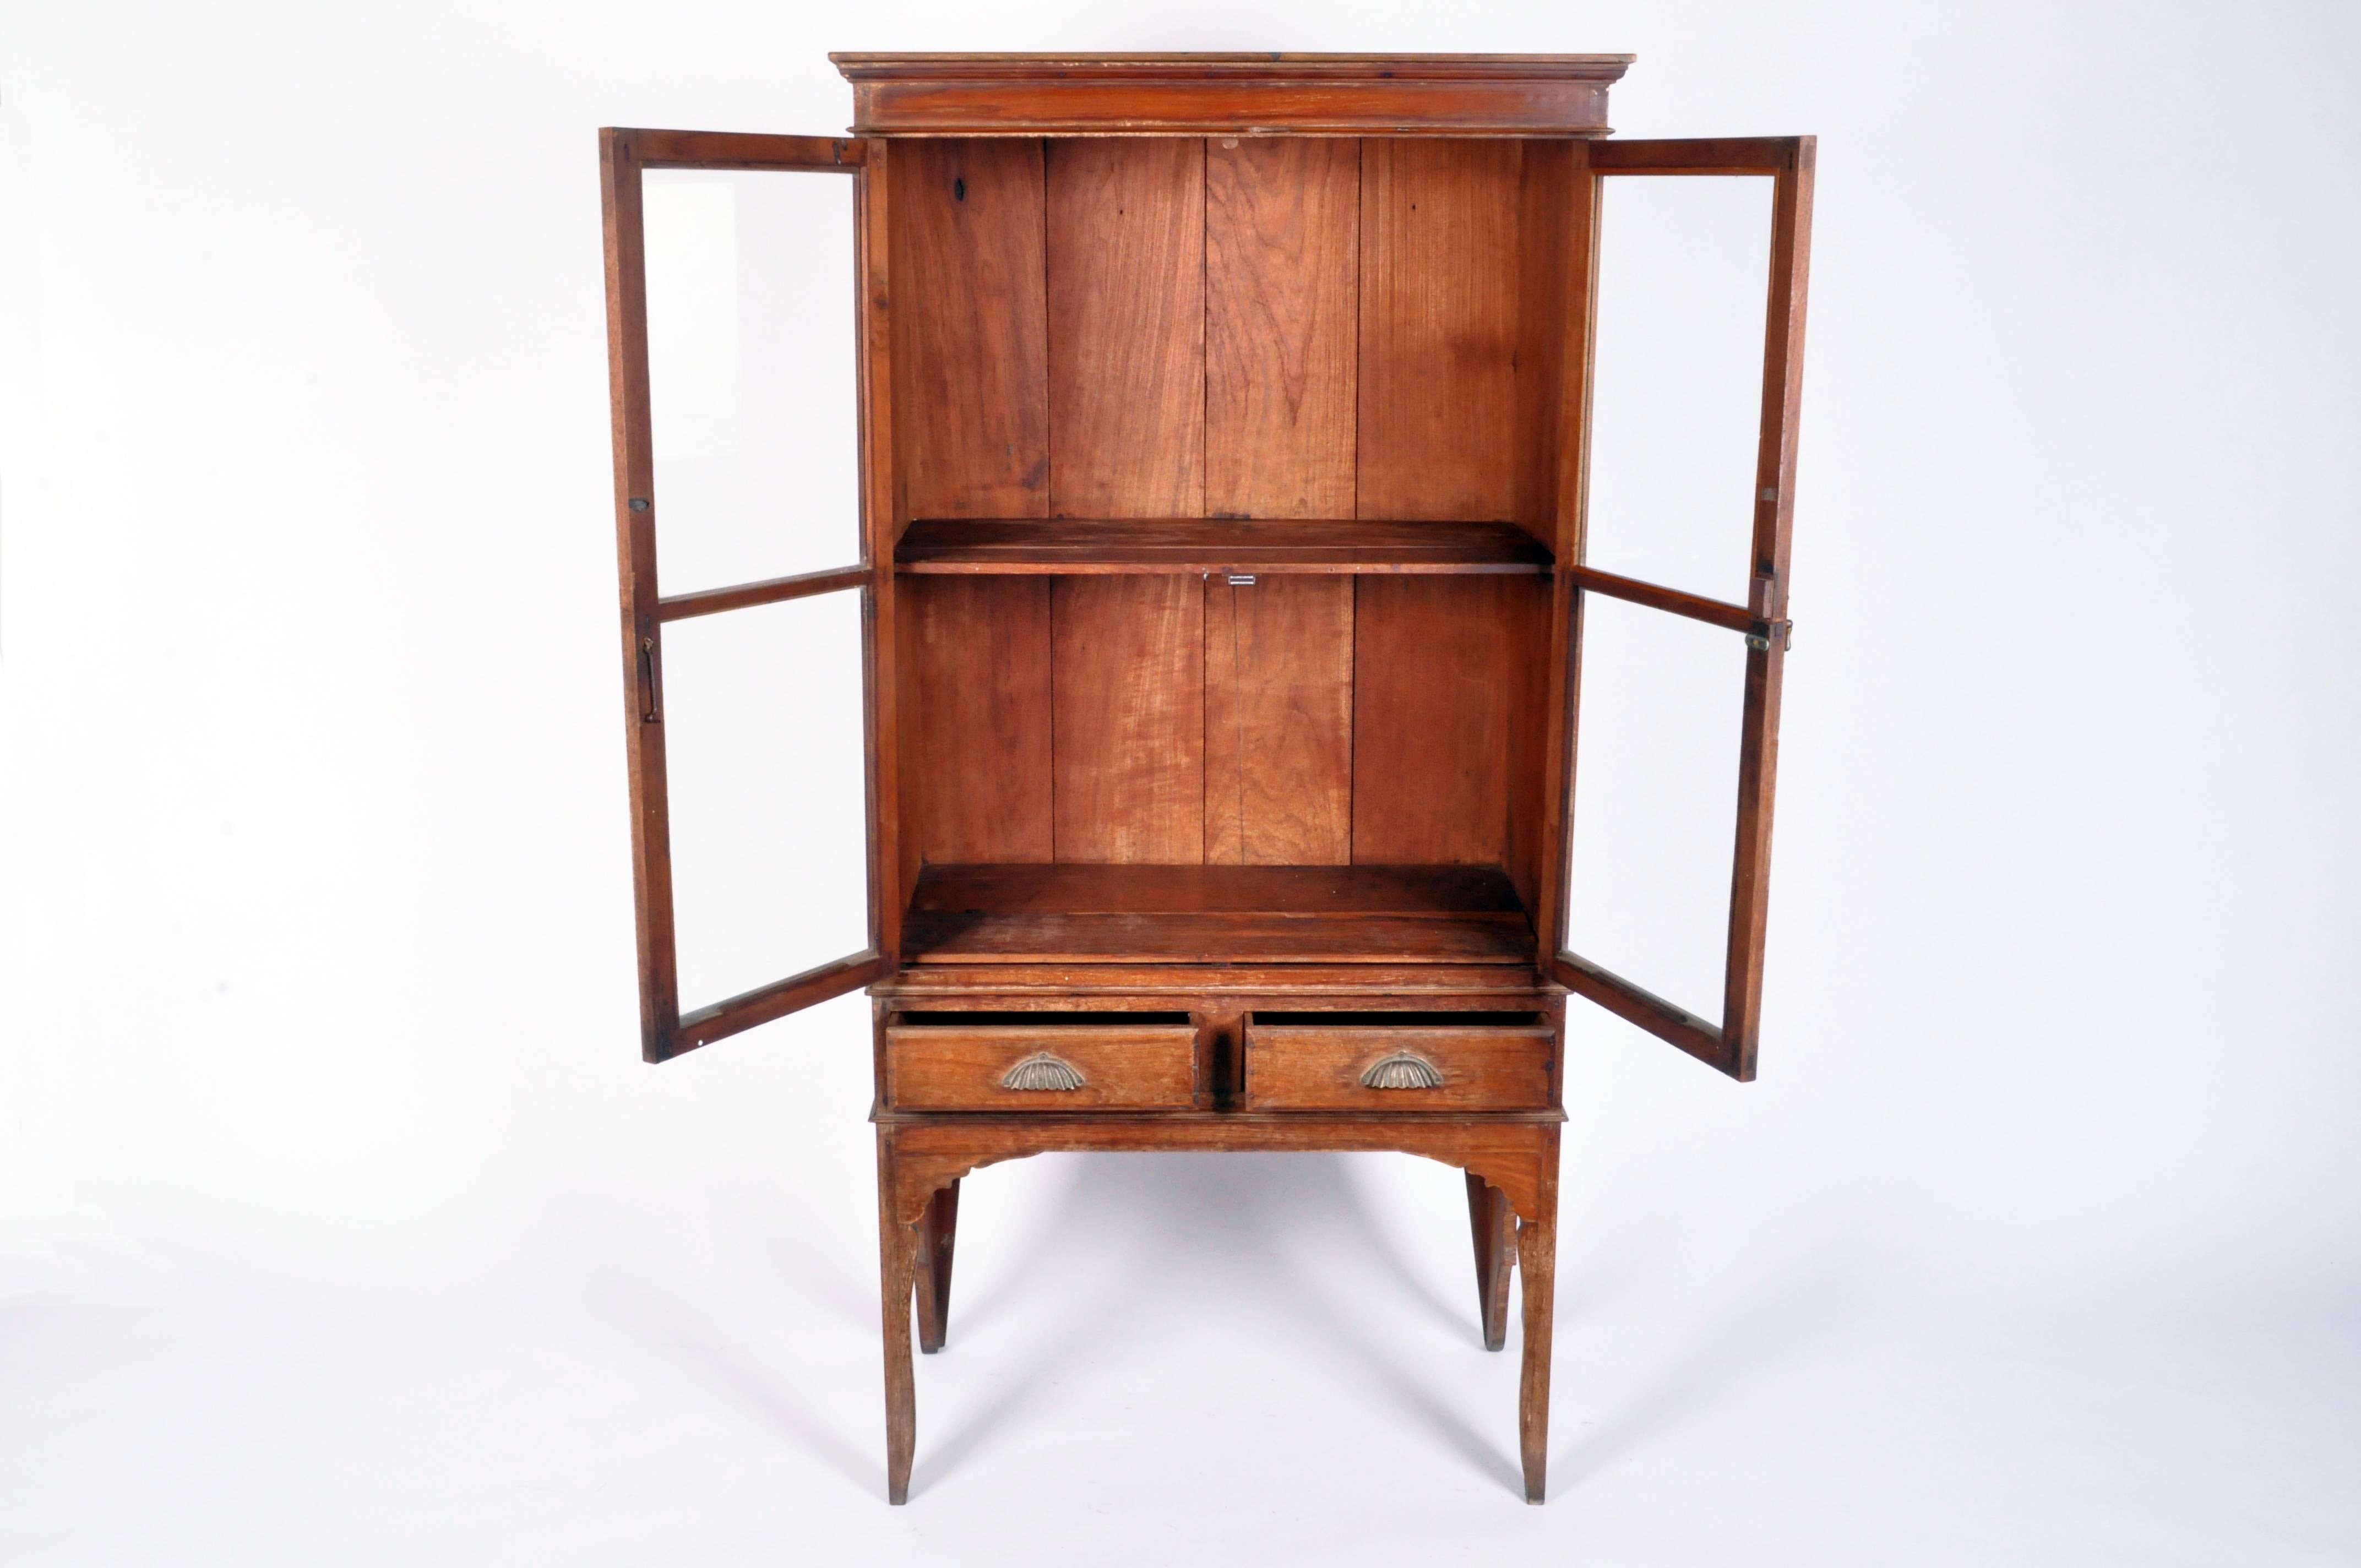 This Northern Thai display cabinet came from Chiang Mai and is made from solid teak wood. Inside it features a shelf and below are two drawers for storage. The style of the piece is very angular and simple. Northern Thai pieces are a mix of Thai